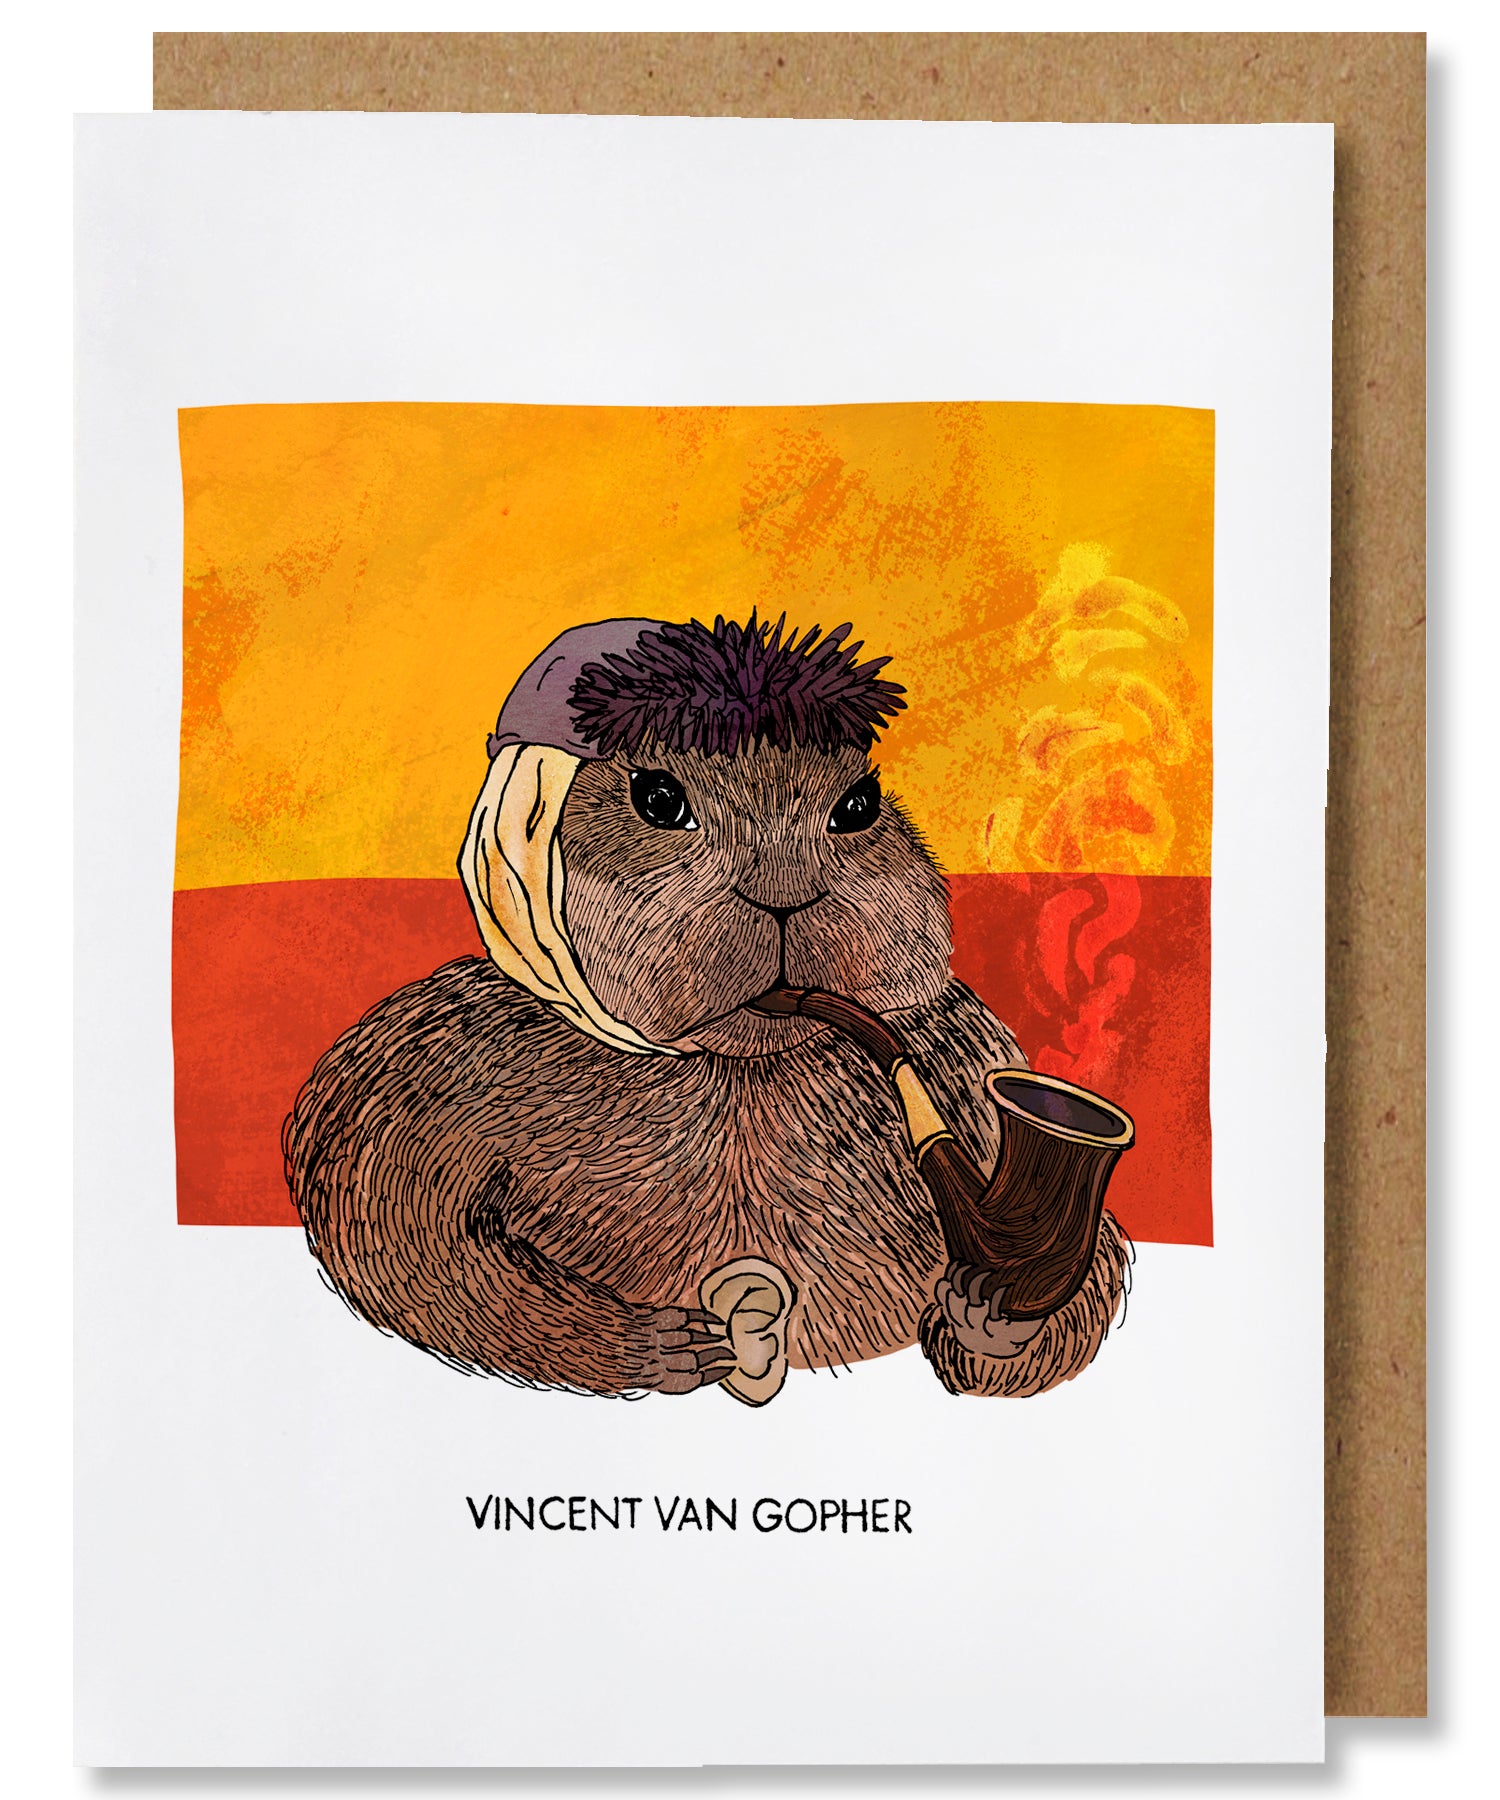 The Vincent van Gopher greeting card depicts Vincent van Gogh as a gopher. The gopher is facing the right, wearing a grey blue winter hat, and has a bandaged ear. He is holding a wooden smoking pipe in his left paw with hints of smoke coming up and holding a human ear in his right paw, a nod to van Gogh cutting off his ear. The background has two horizontal blocks of swirly colors, yellow on top of red. This card is placed with a brown kraft envelope.